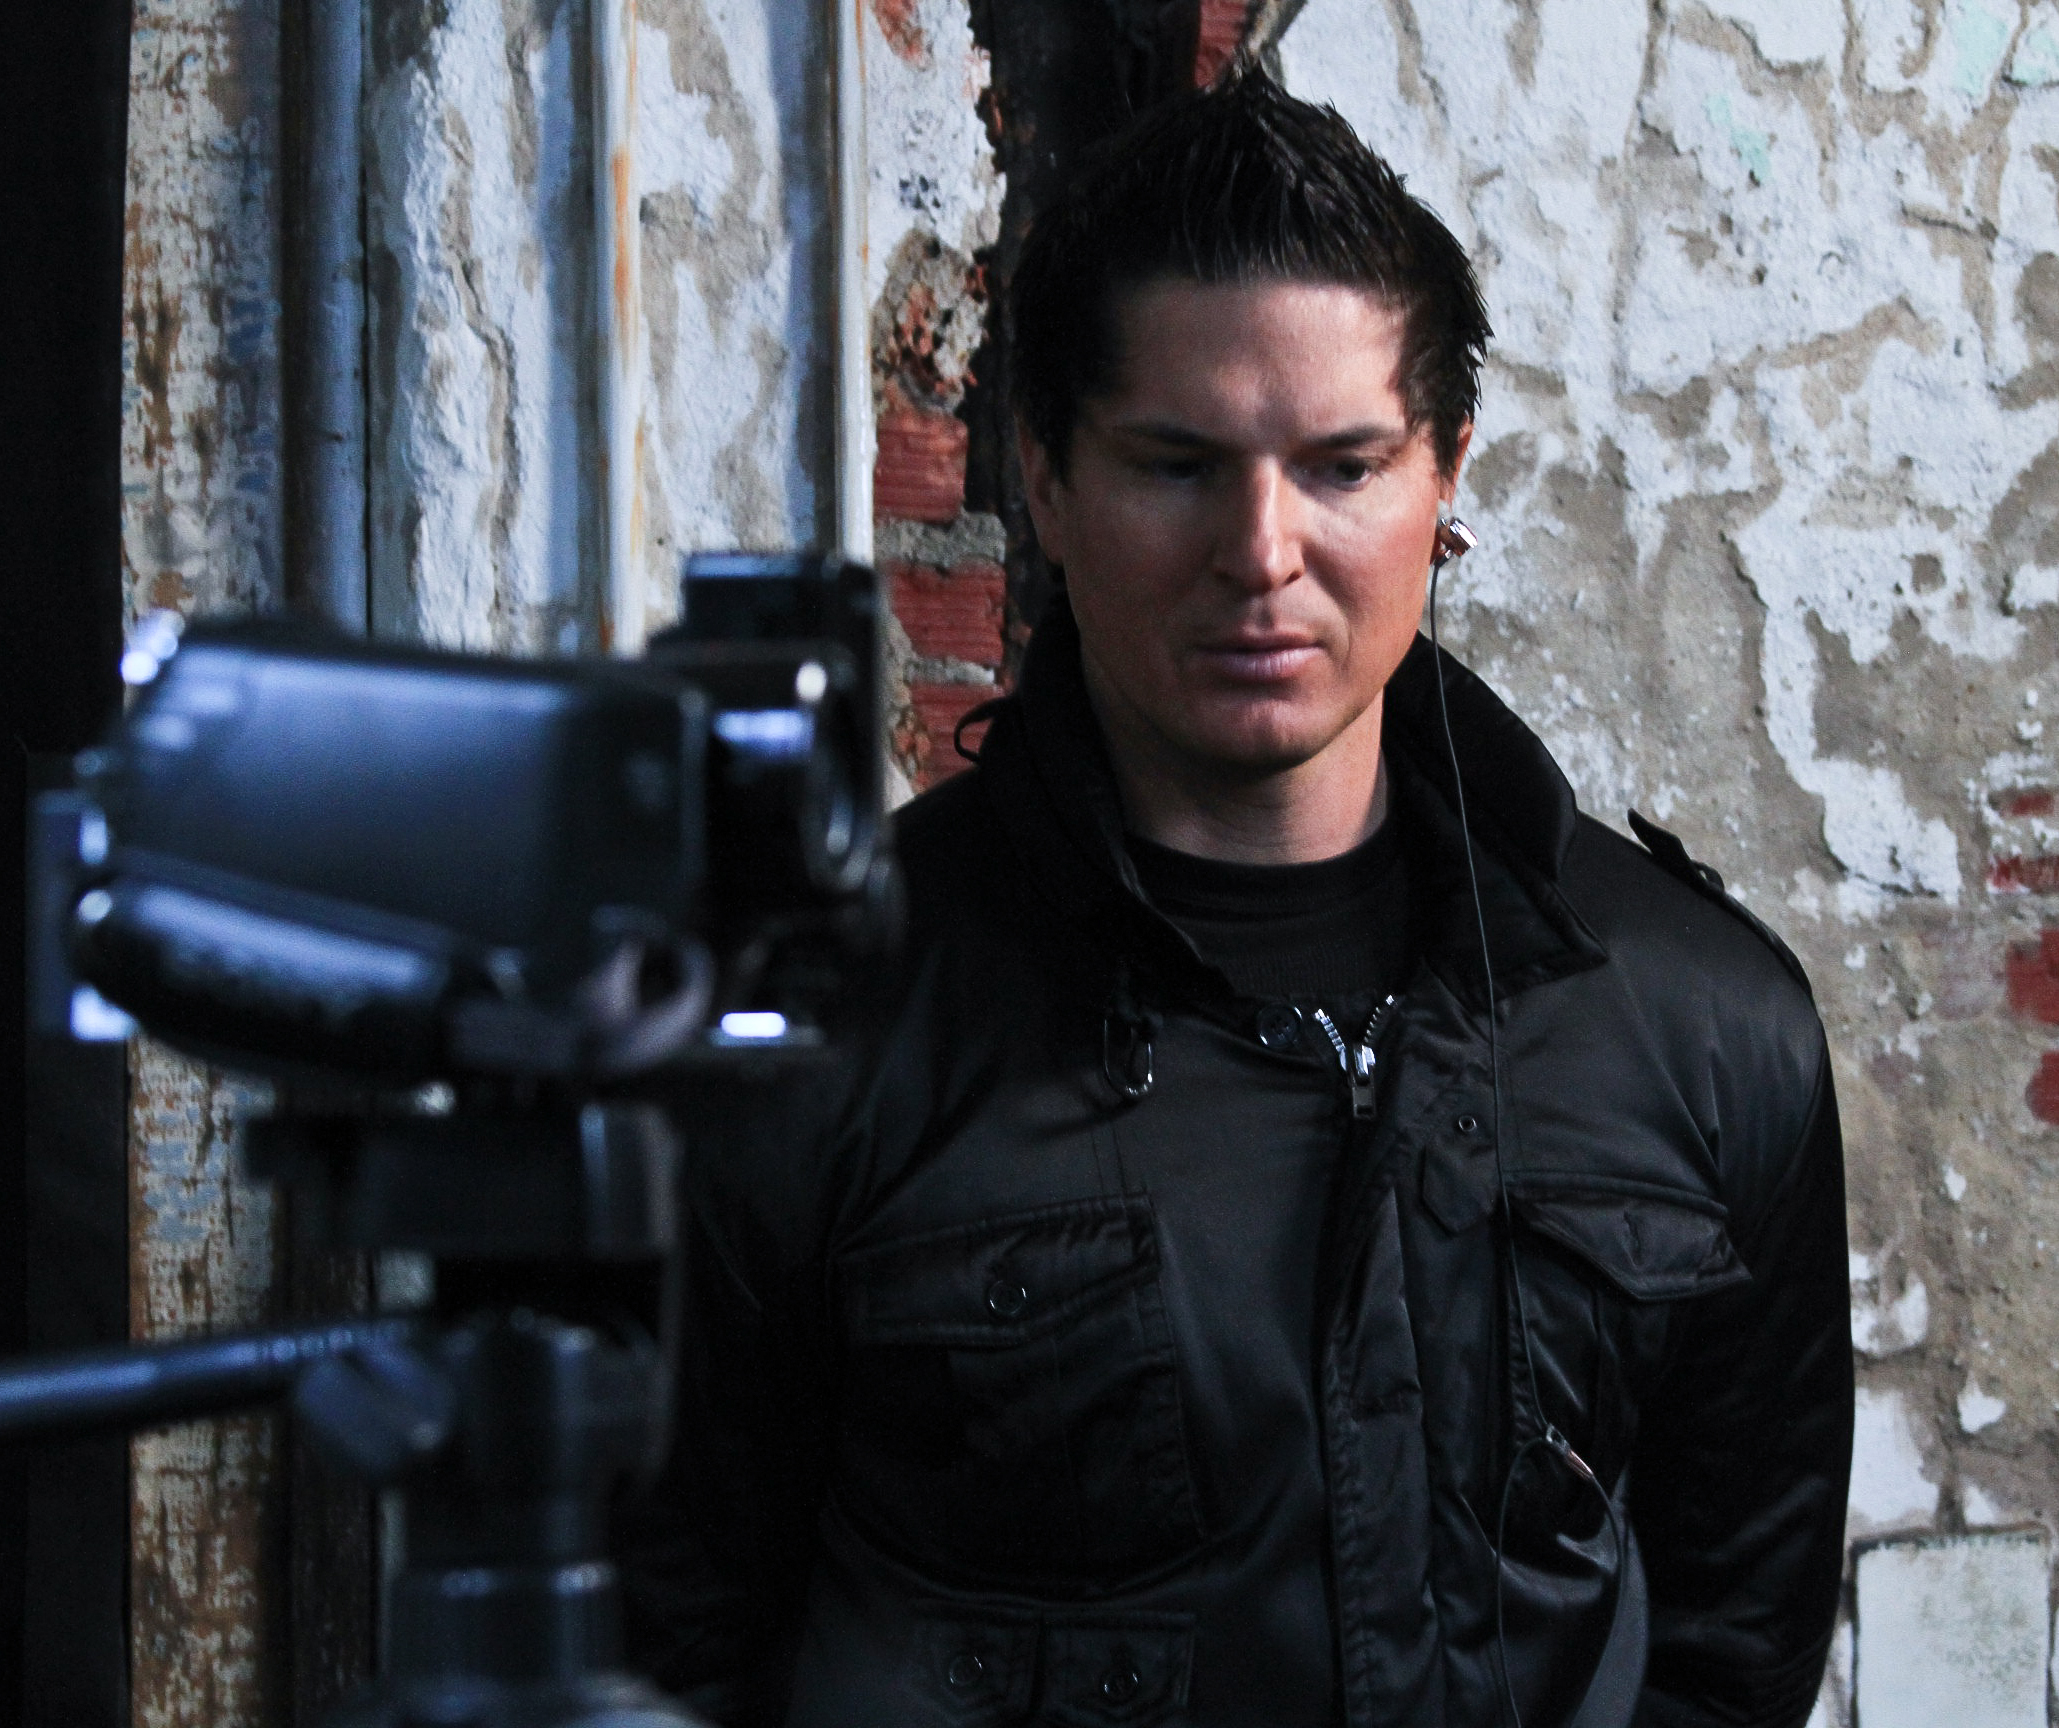 Zak Bagans image zak HD wallpapers and backgrounds photos.